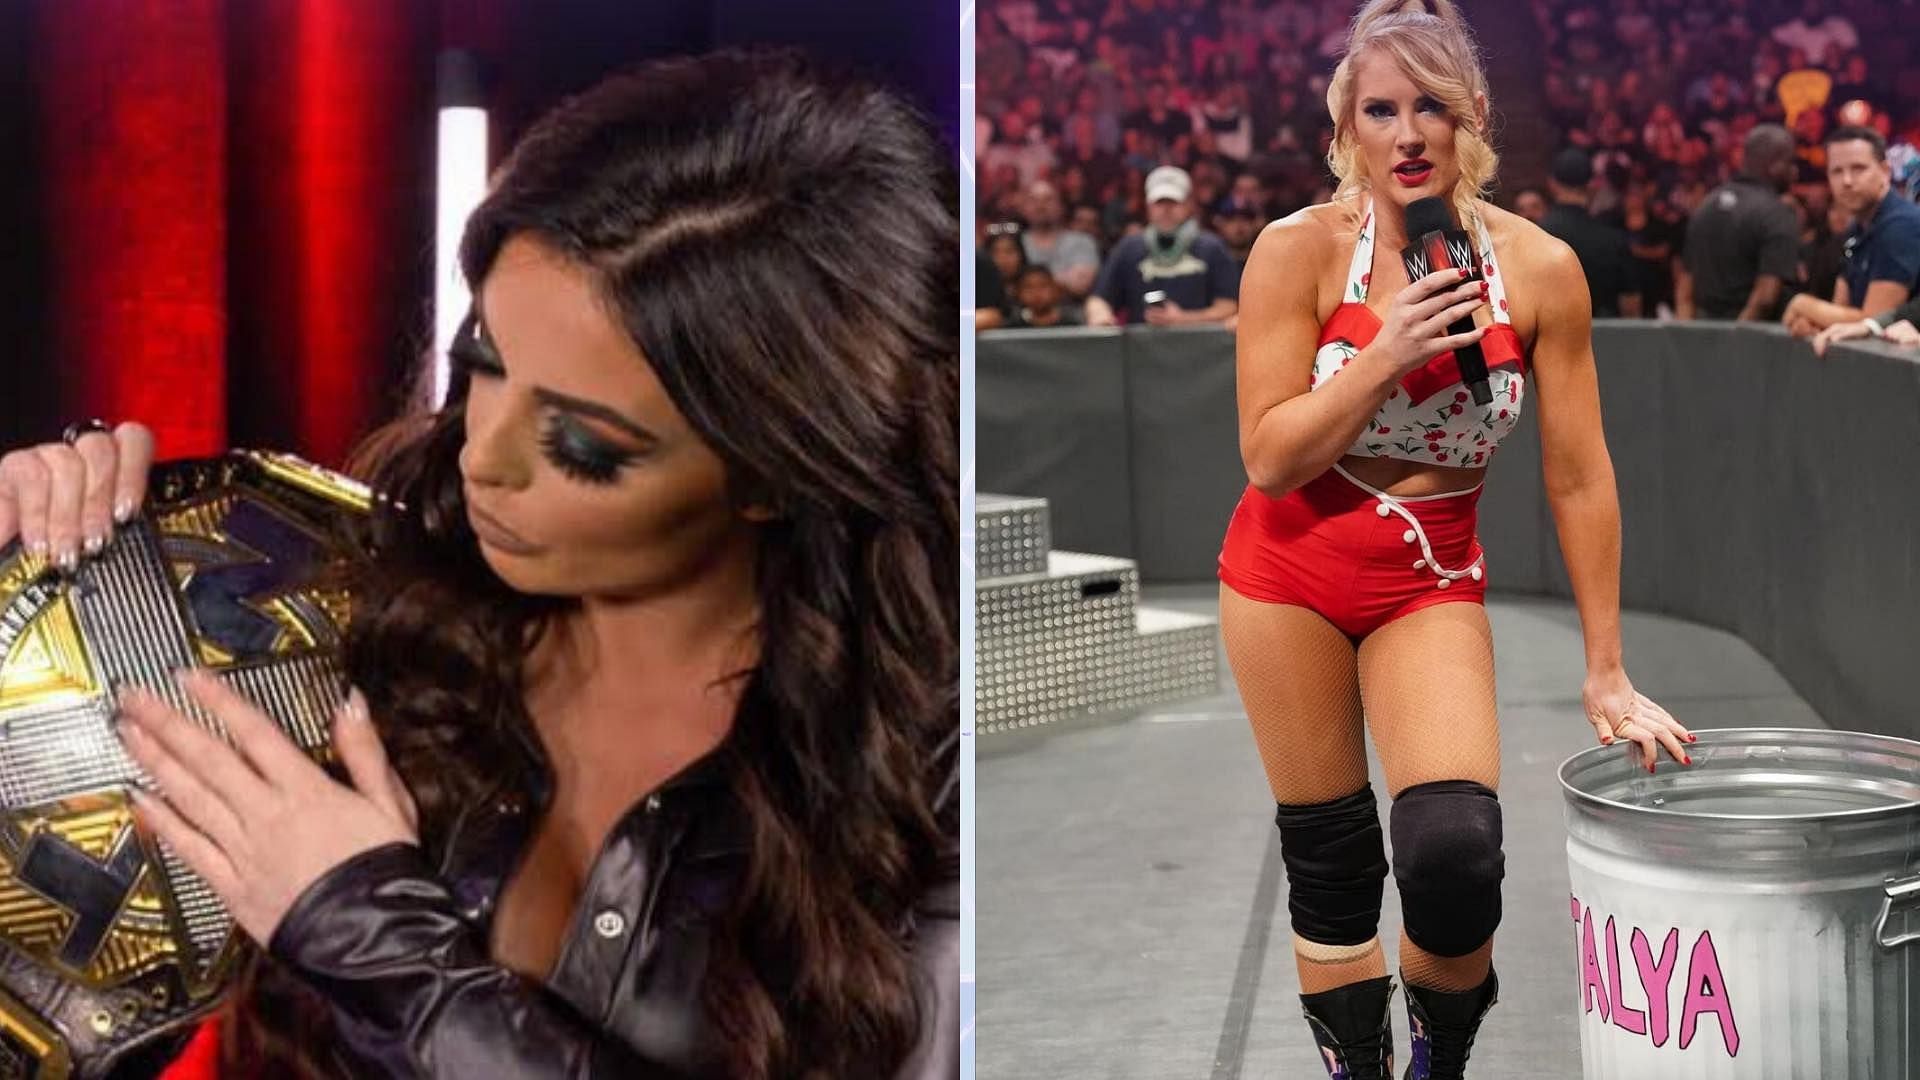 Mandy Rose and Lacey Evans were pushed at different times.